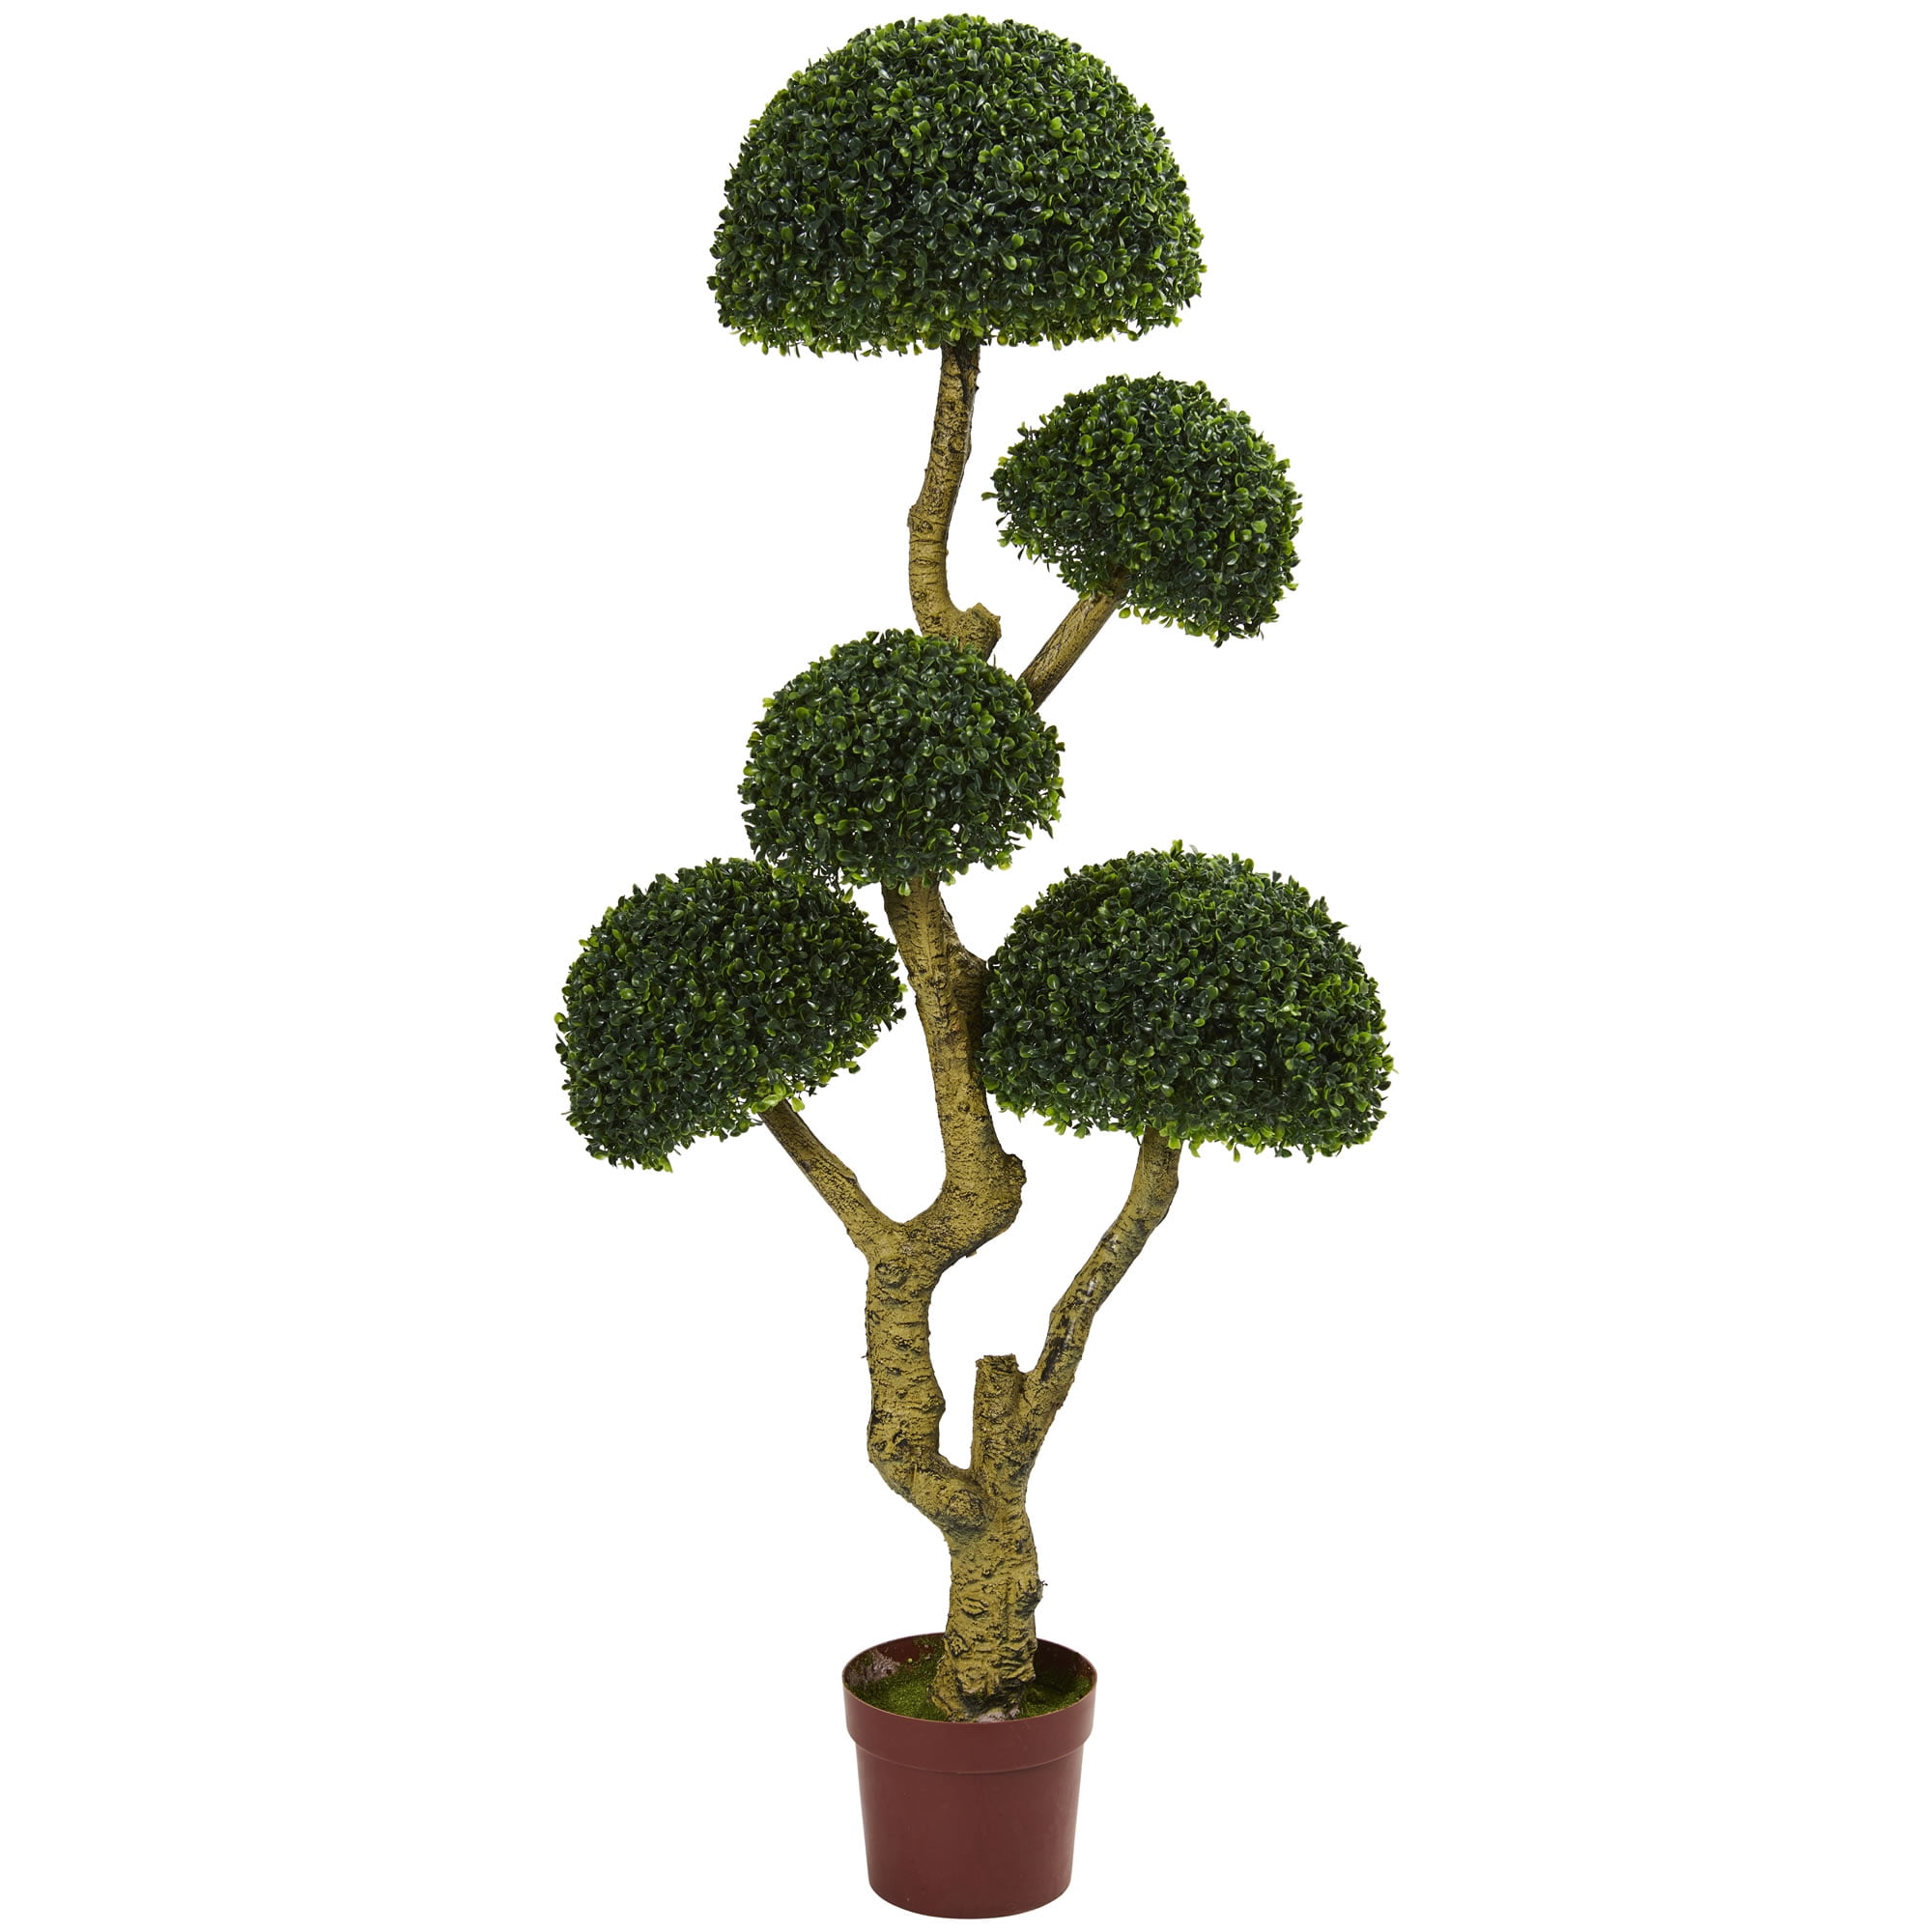 THE BLOOM TIMES 5ft Spiral Boxwood Topiary Trees Artificial Outdoor Faux Potted Plants UV Protected Fake Indoor Plants in Pots for Home Office Front Porch Decor Set of 2